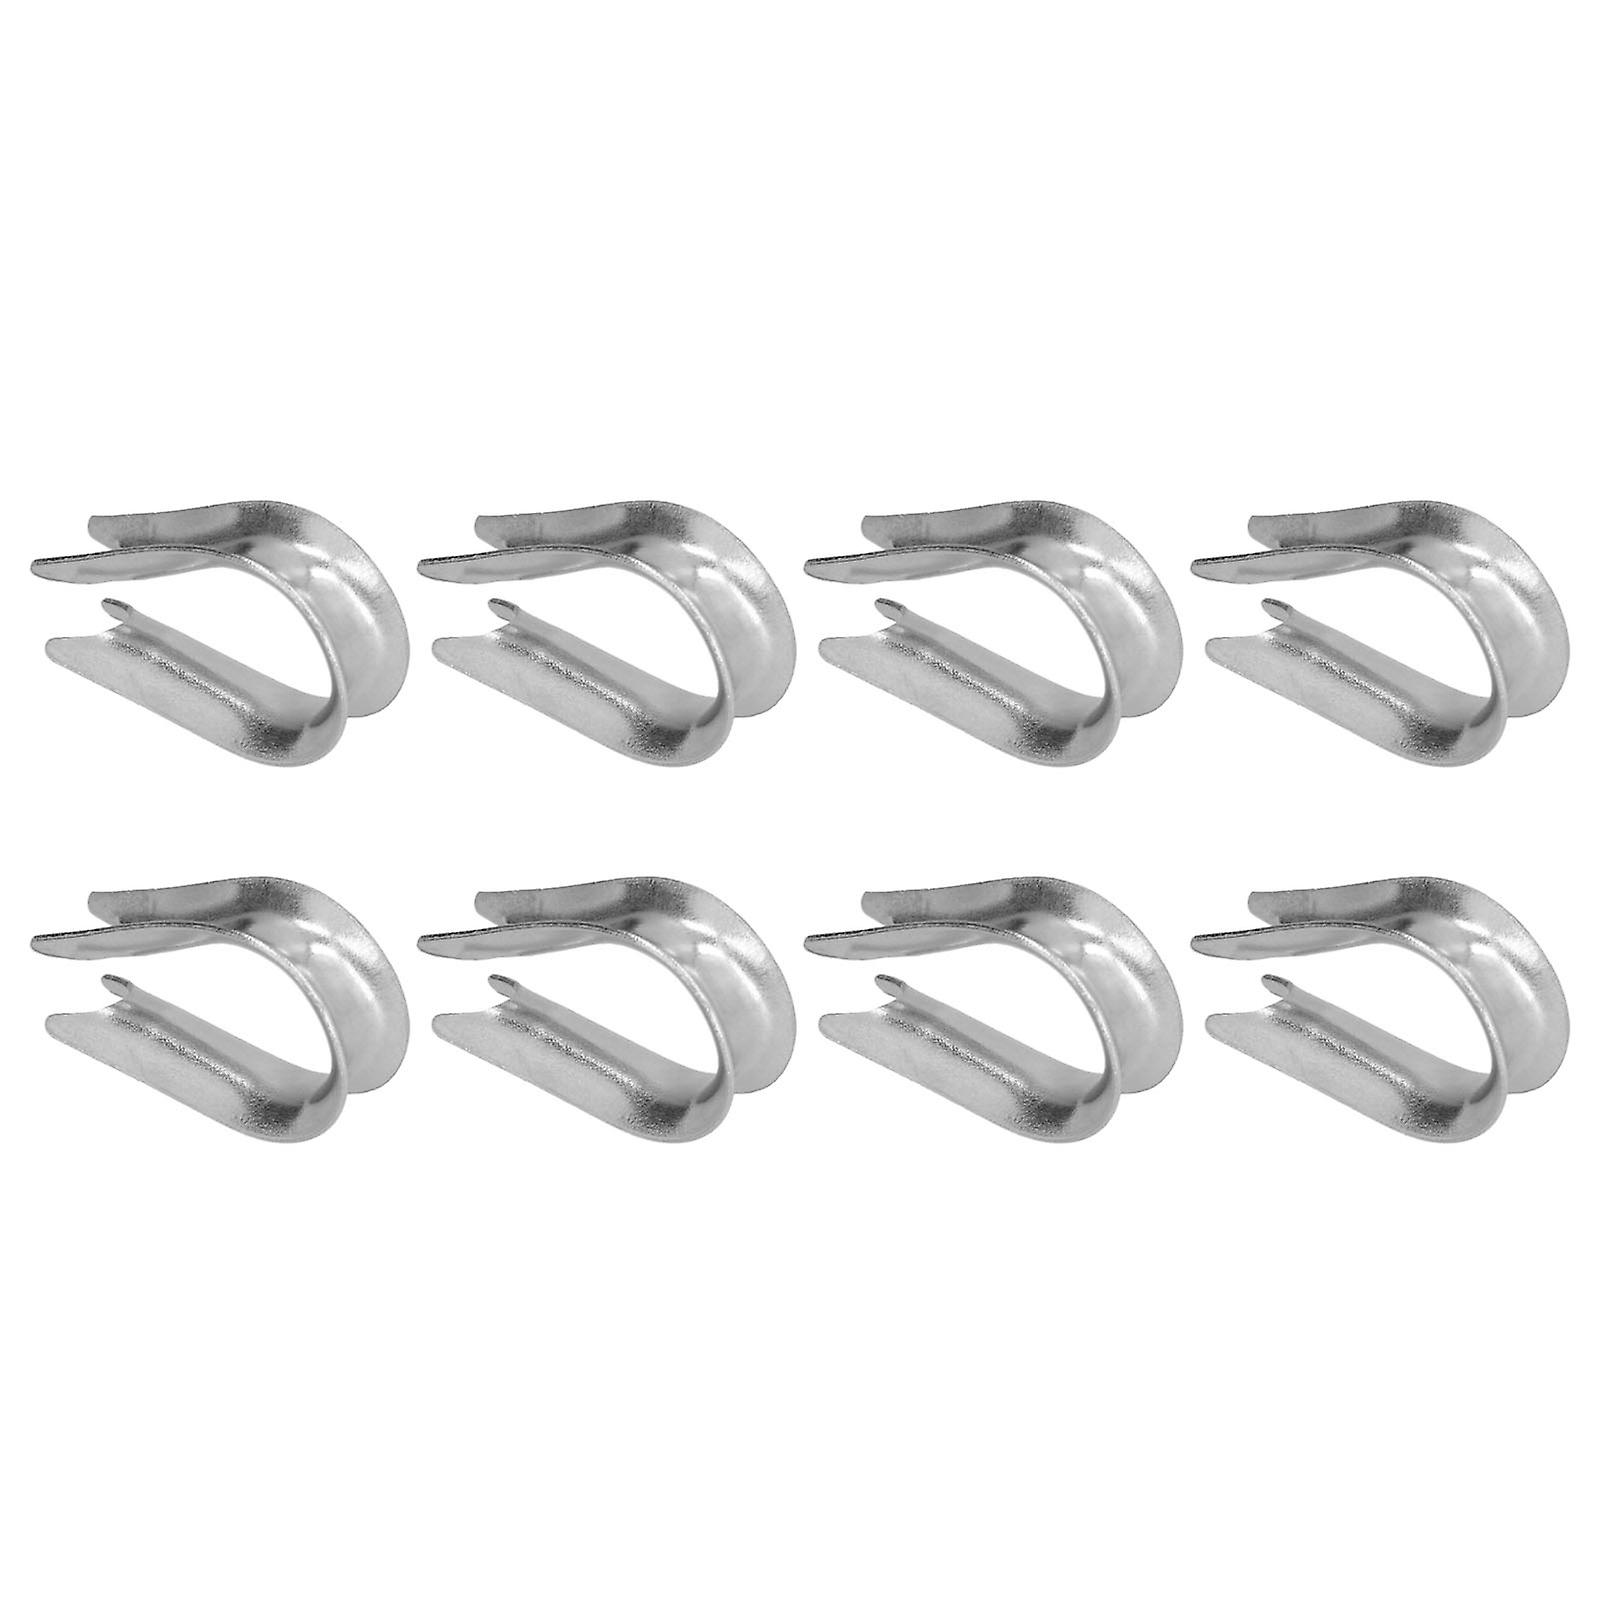 50pcs Wire Rope Thimble Stainless Steel Cable Rigging Tools For Shipbuilding Industry(m1010mm )